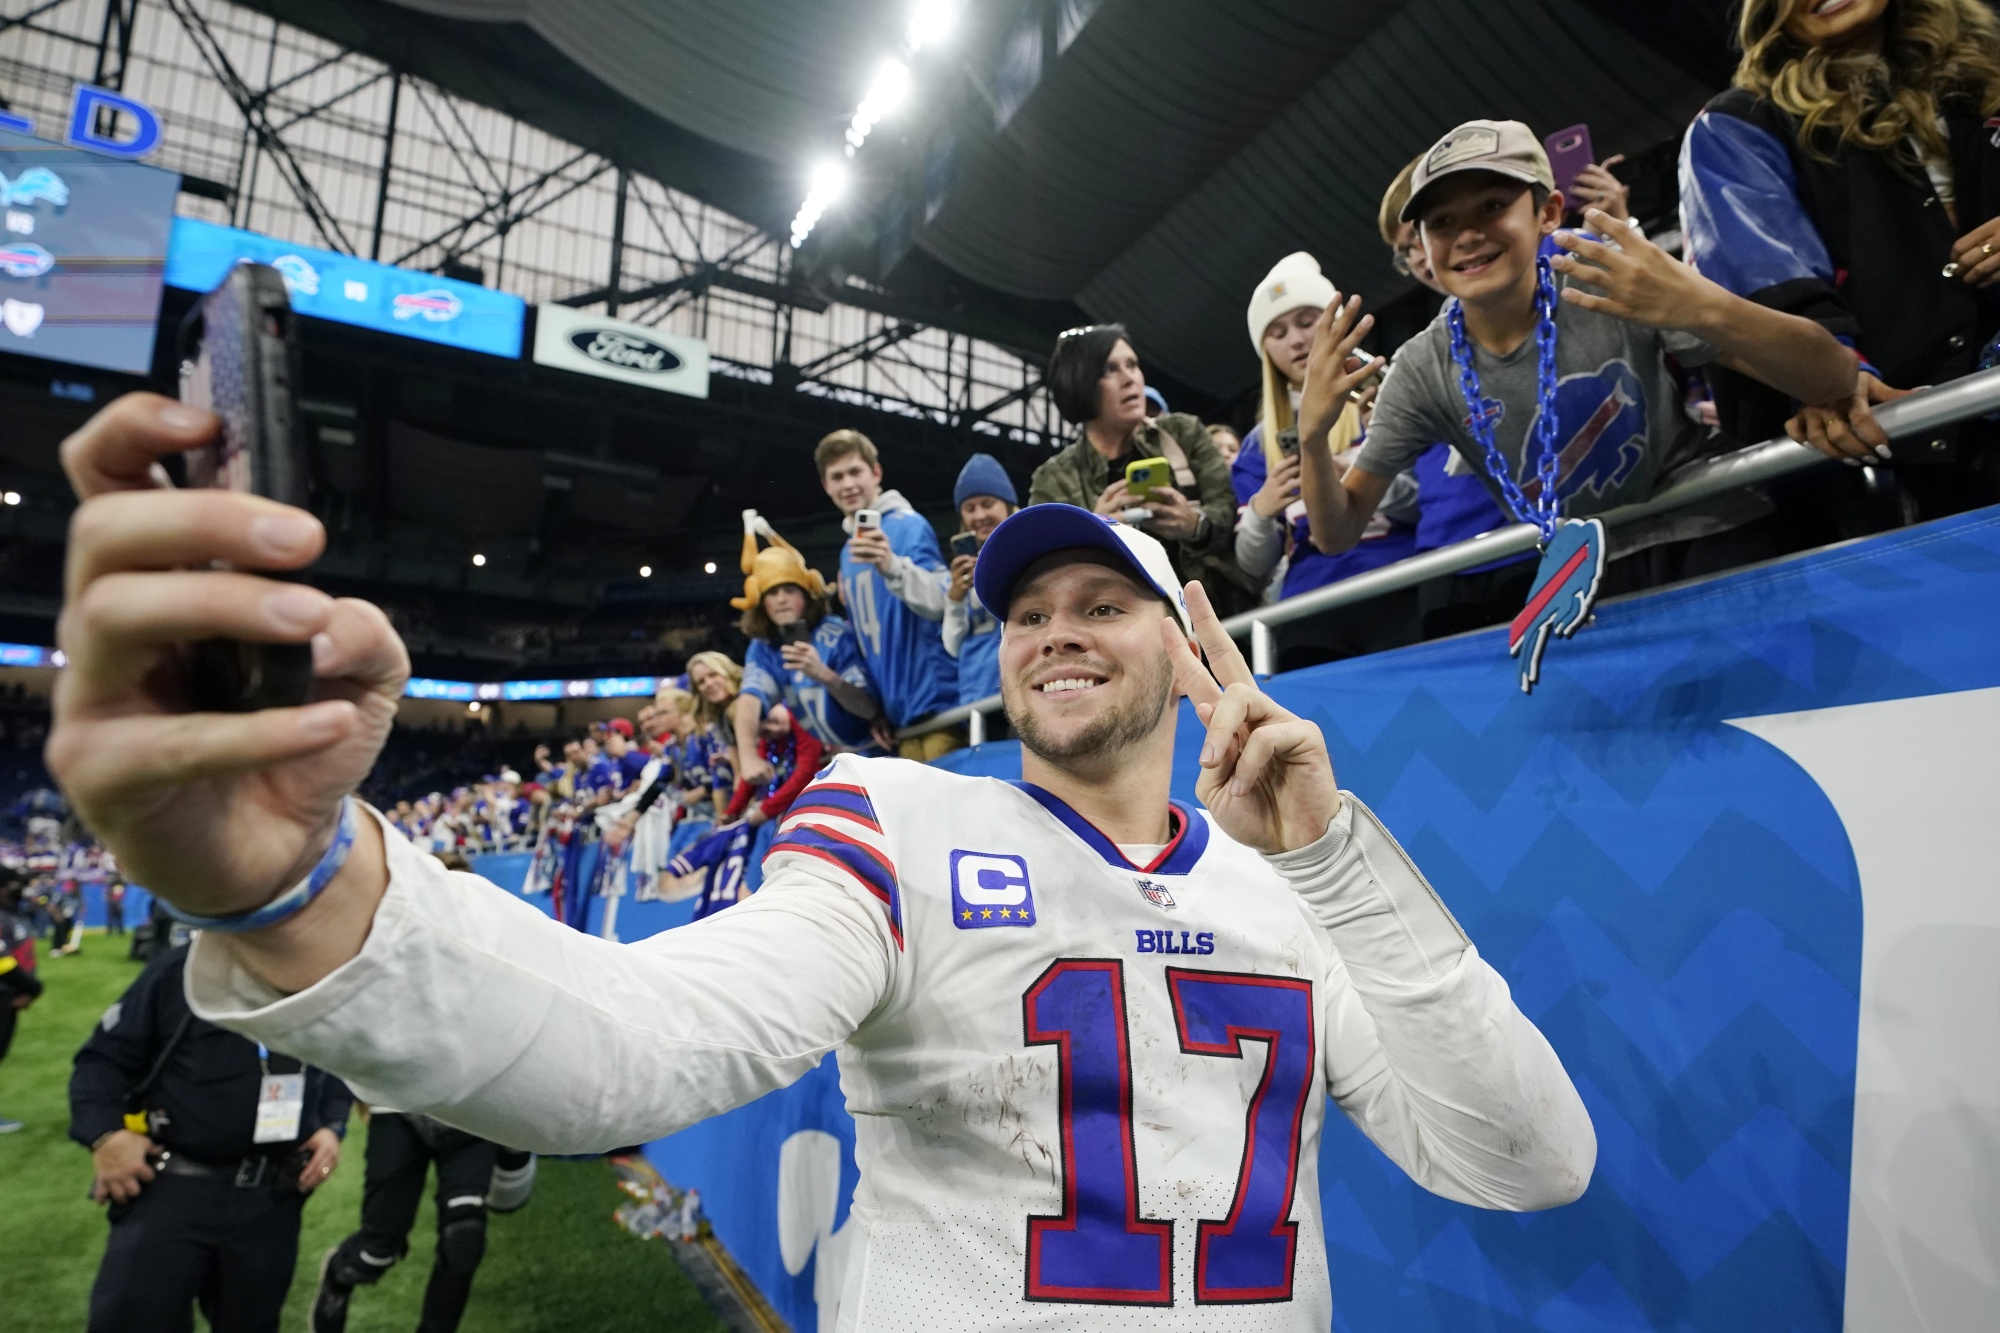 Bills Beat Lions 28-25 for 2nd Win in 5 Days At Ford Field - Bloomberg